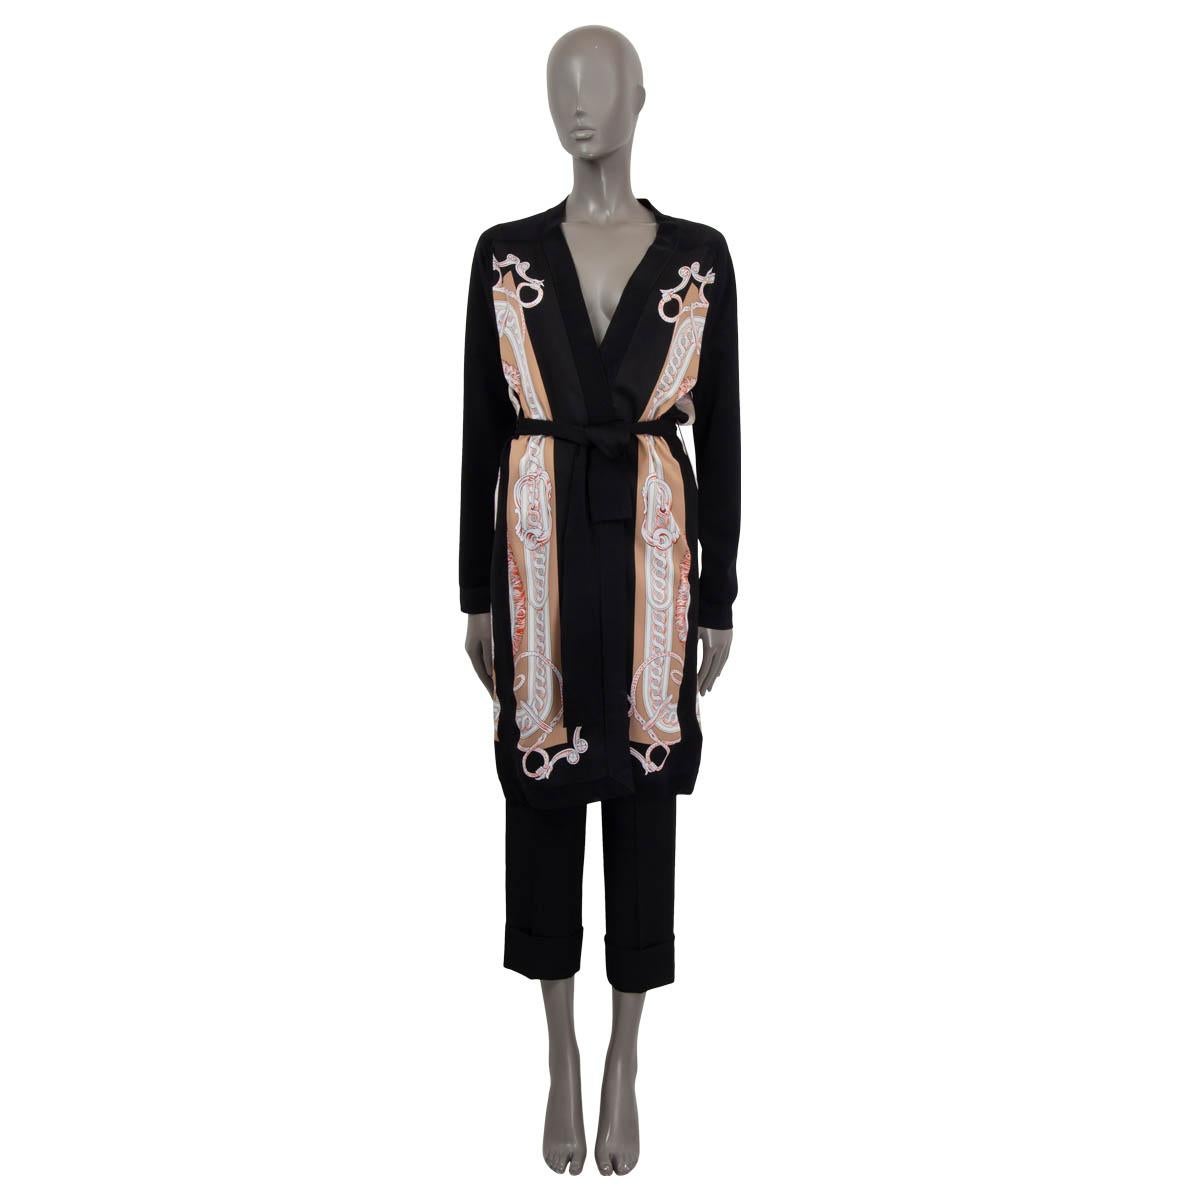 100% authentic Hermès Bride de Cour Remix belted twillaine cardigan in black, beige, off-white and orange silk (100%). Features long raglan knit sleeves (sleeve measurements taken from the neck), belt loops and knit parts in black silk (100%).